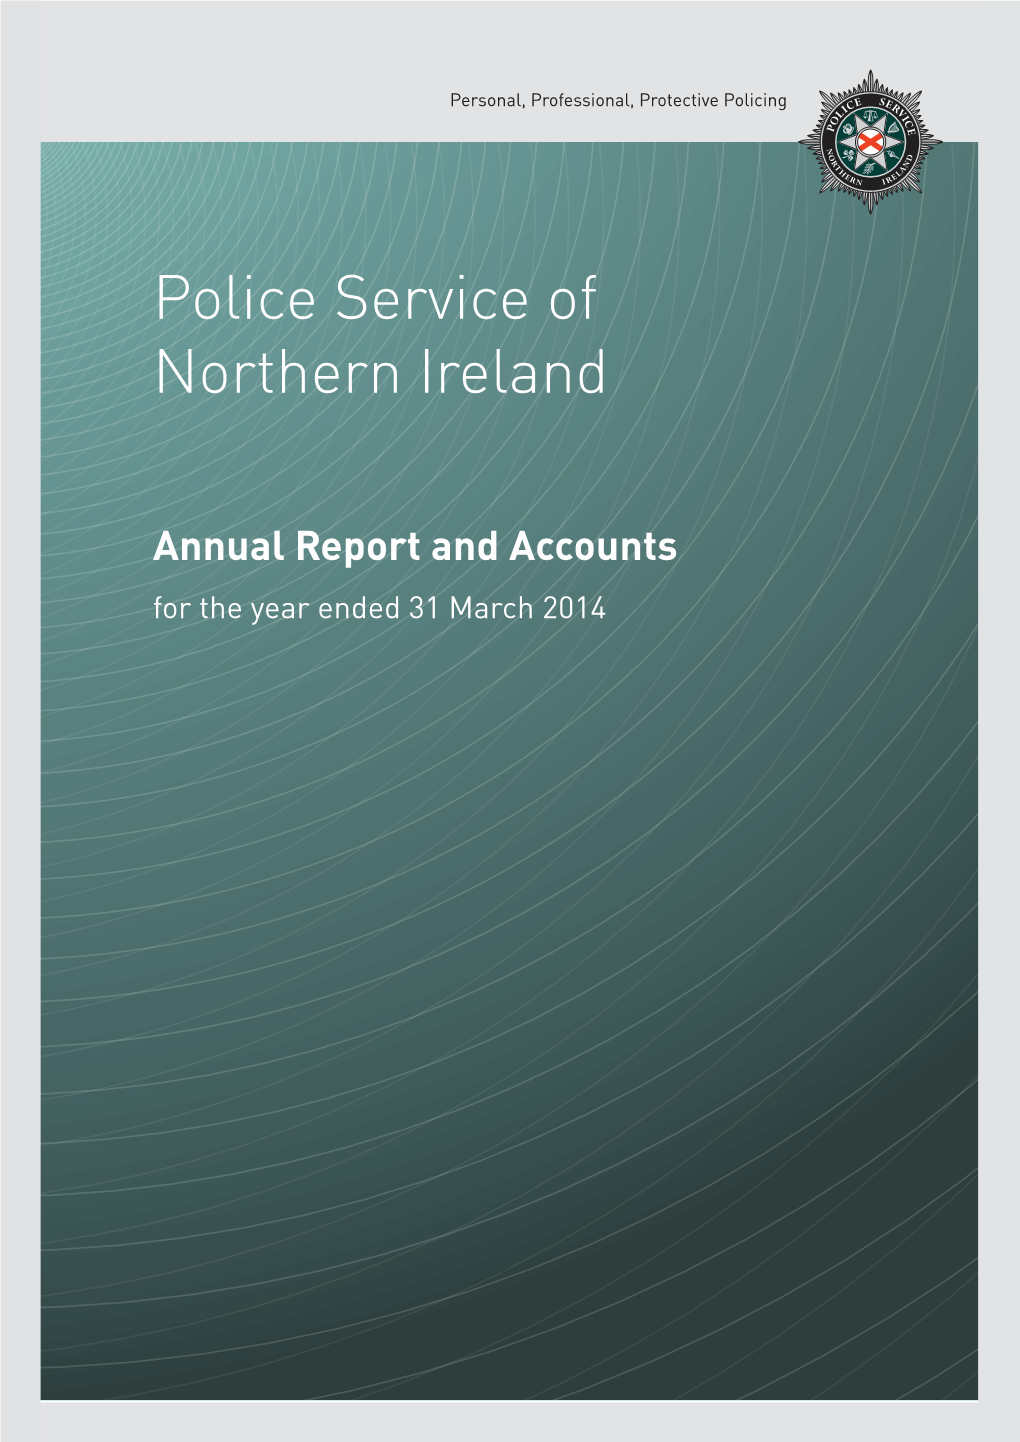 Chief Constable's Annual Report 2013